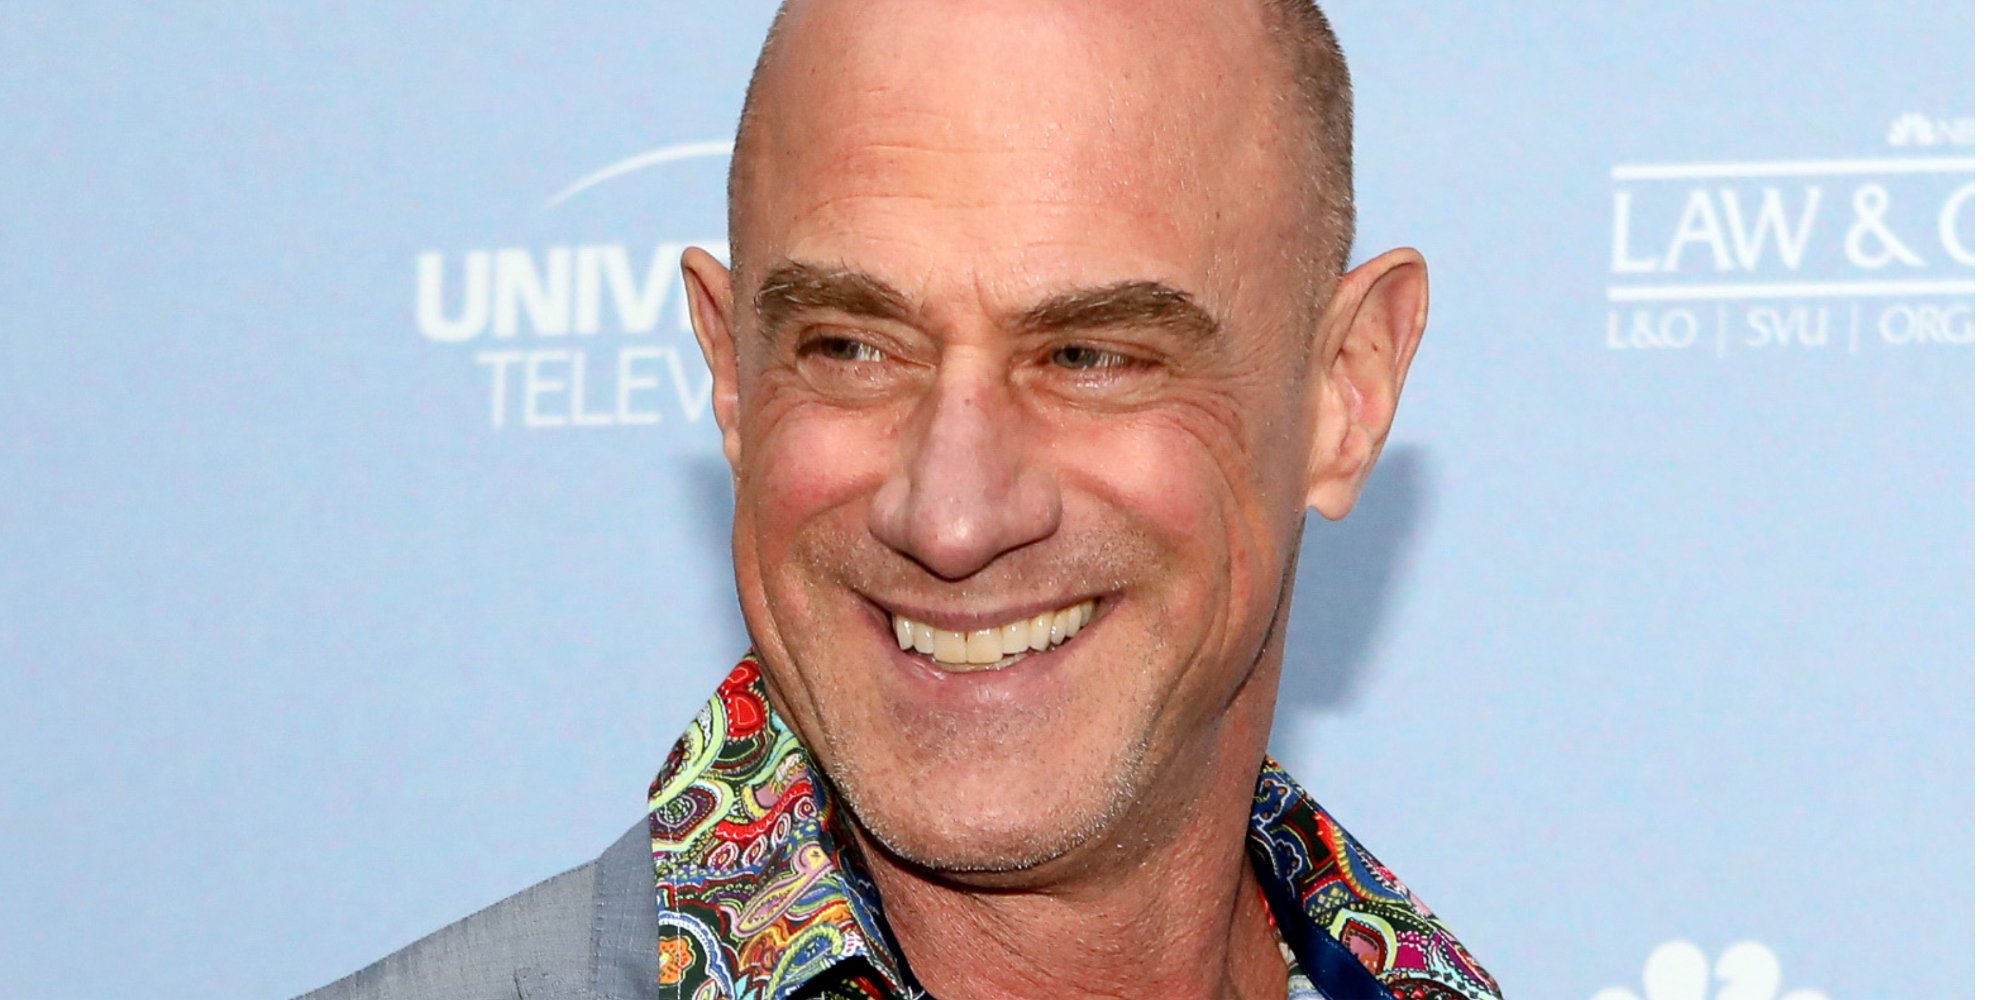 Christopher Meloni is a star of NBC's 'Law & Order' franchise of shows.